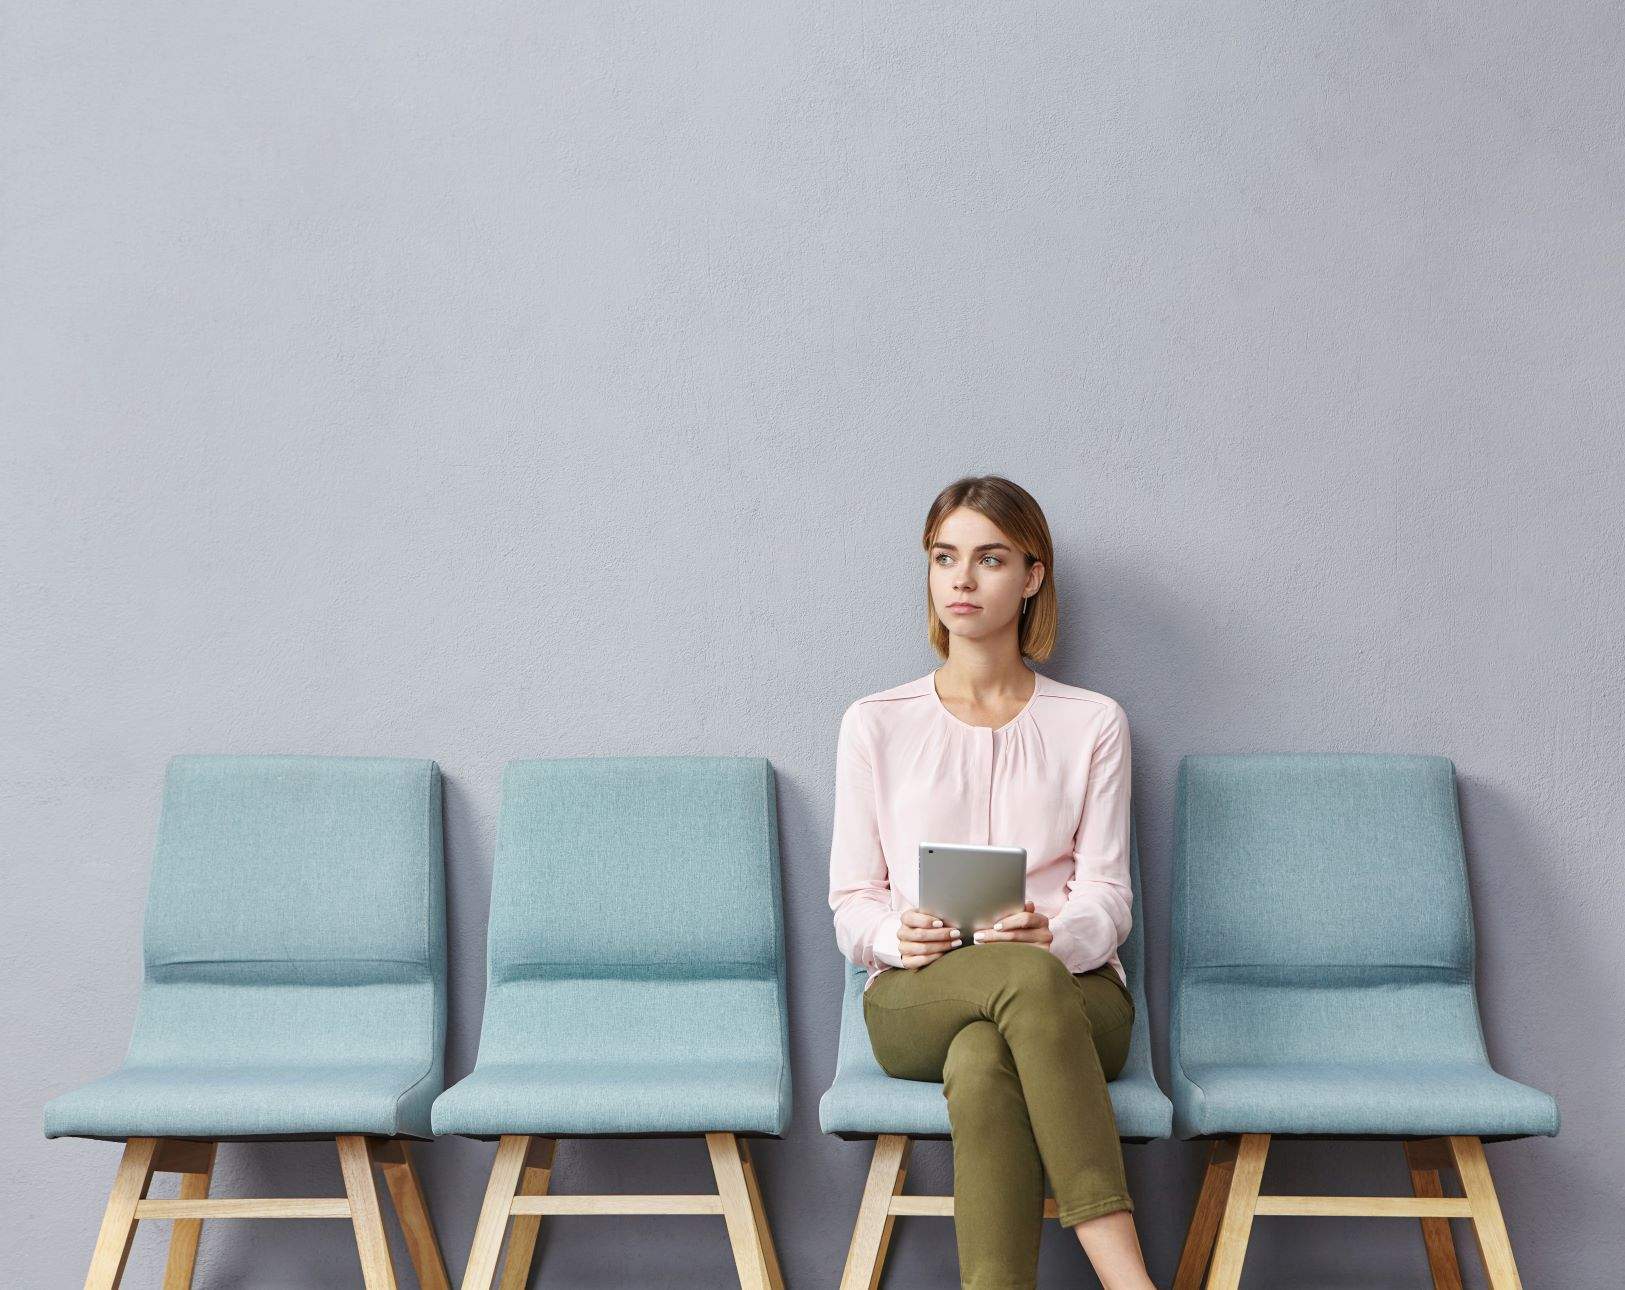 Tips to handle Interview Nerves for Health Service Applicants